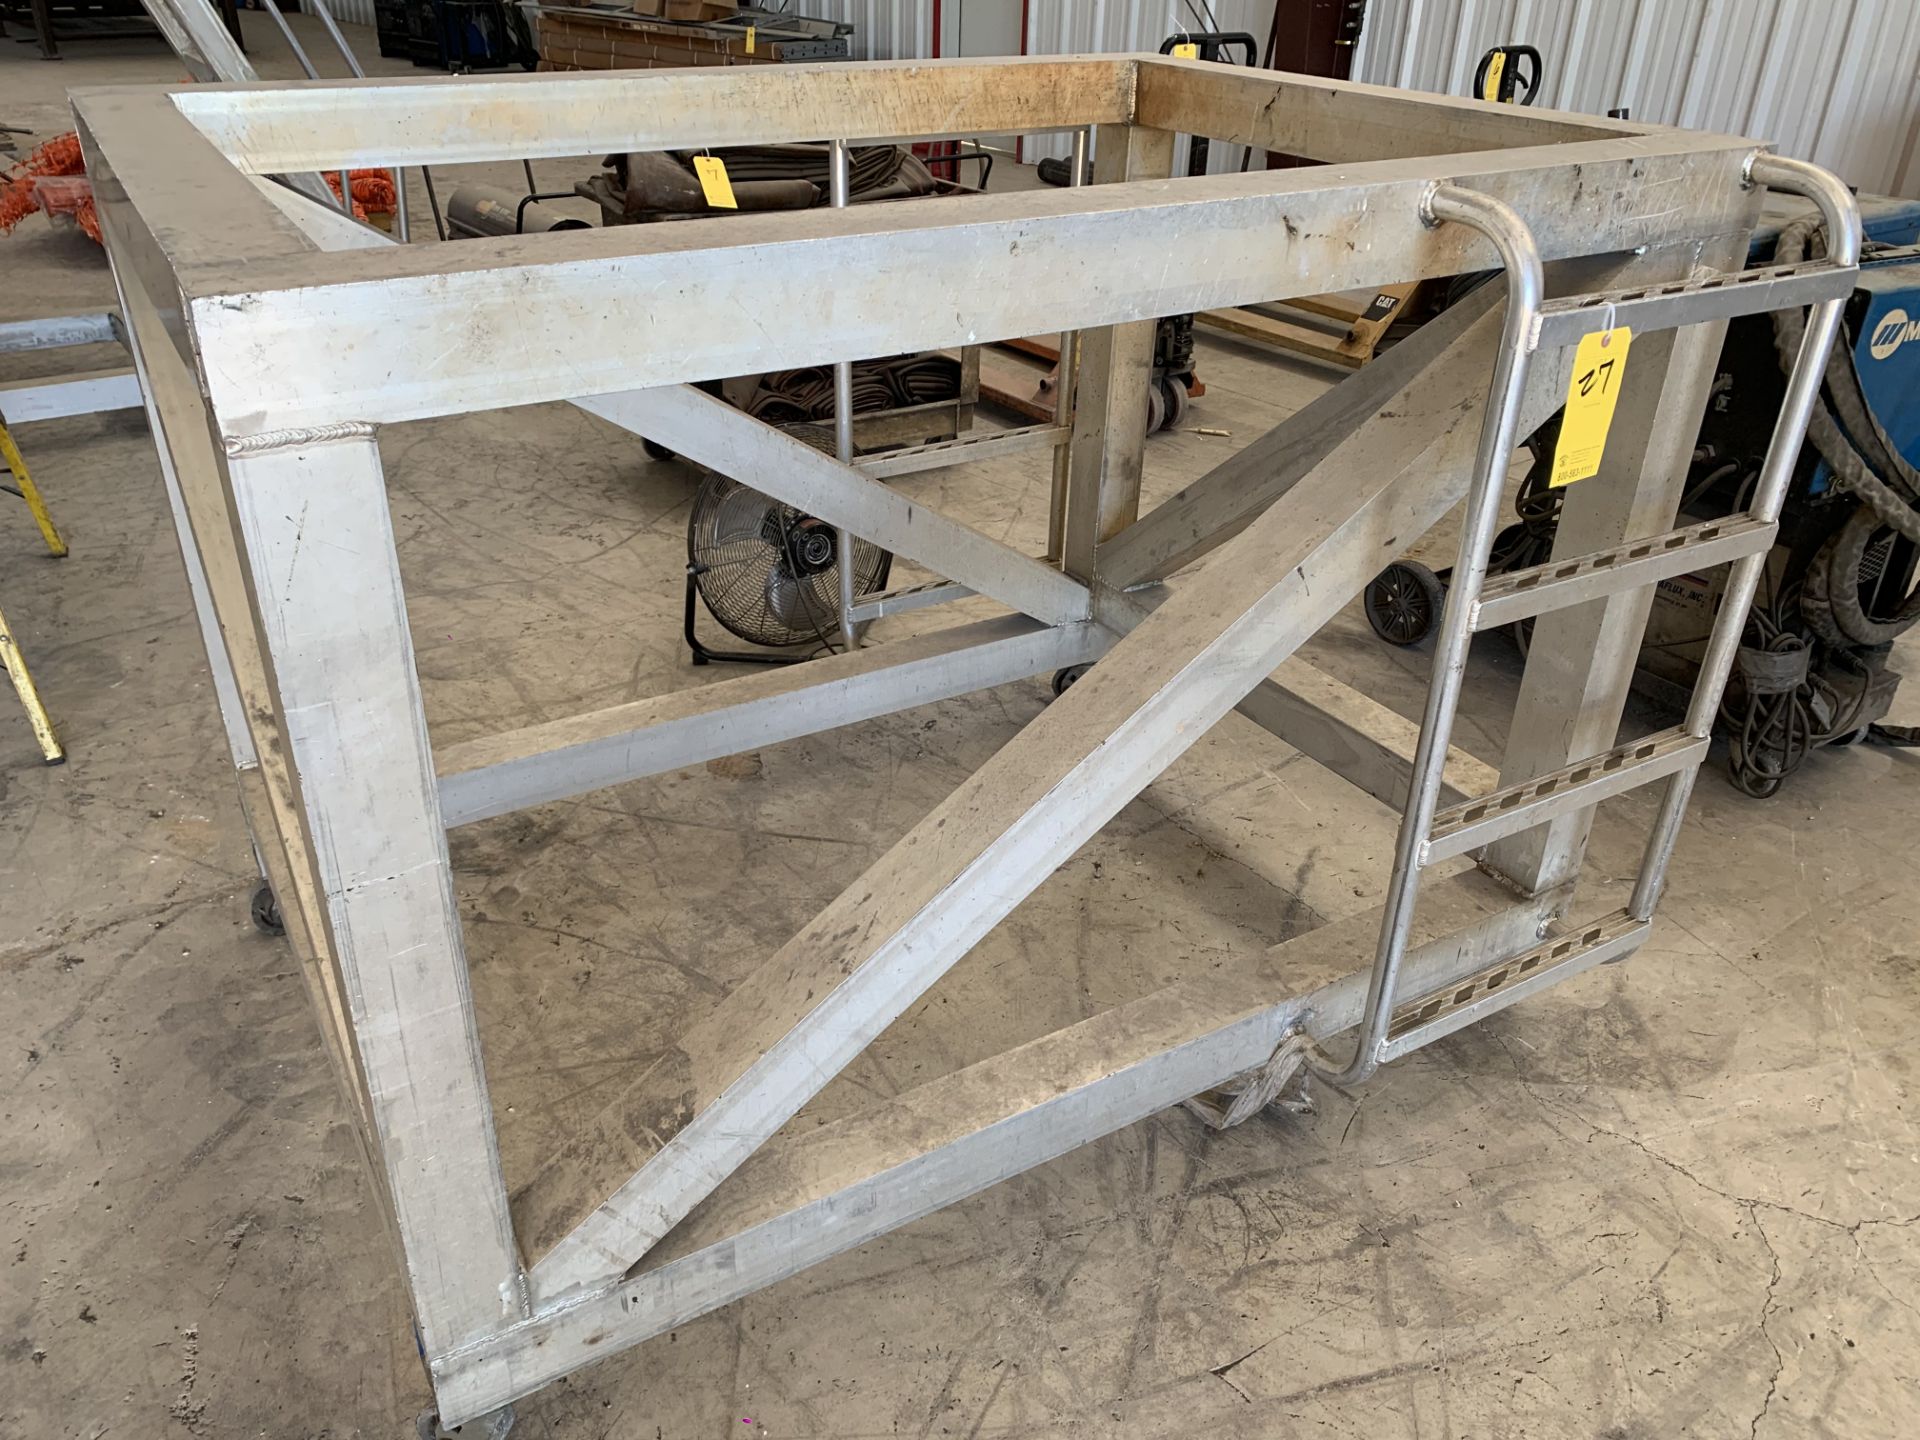 Shop Fabricated Aluminum Rolling Stand (MUST BE REMOVED BY NOVEMBER 16, 2022)